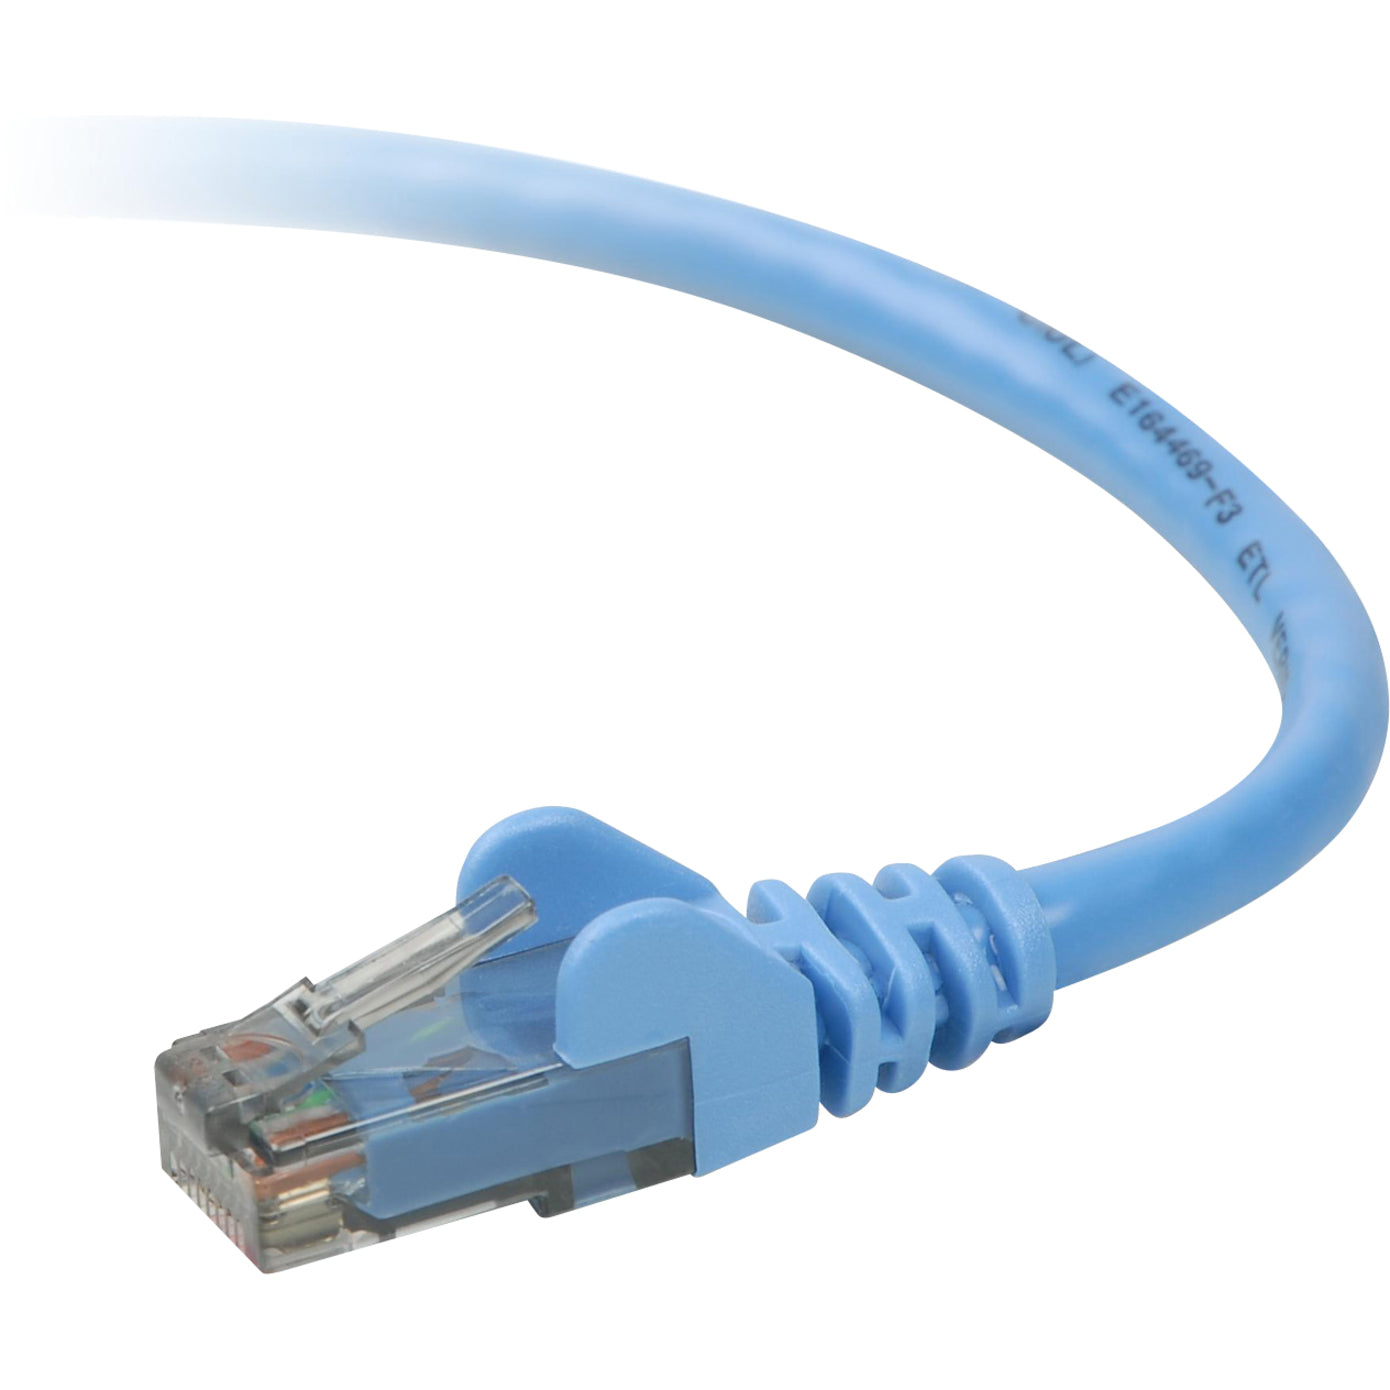 Belkin A3L980B03-BLU-S Cat. 6 UTP Patch Cable, 3 ft, Improved Transmission Performance, Superior Immunity from External Noise, Fewer Retransmission and Lost Packets